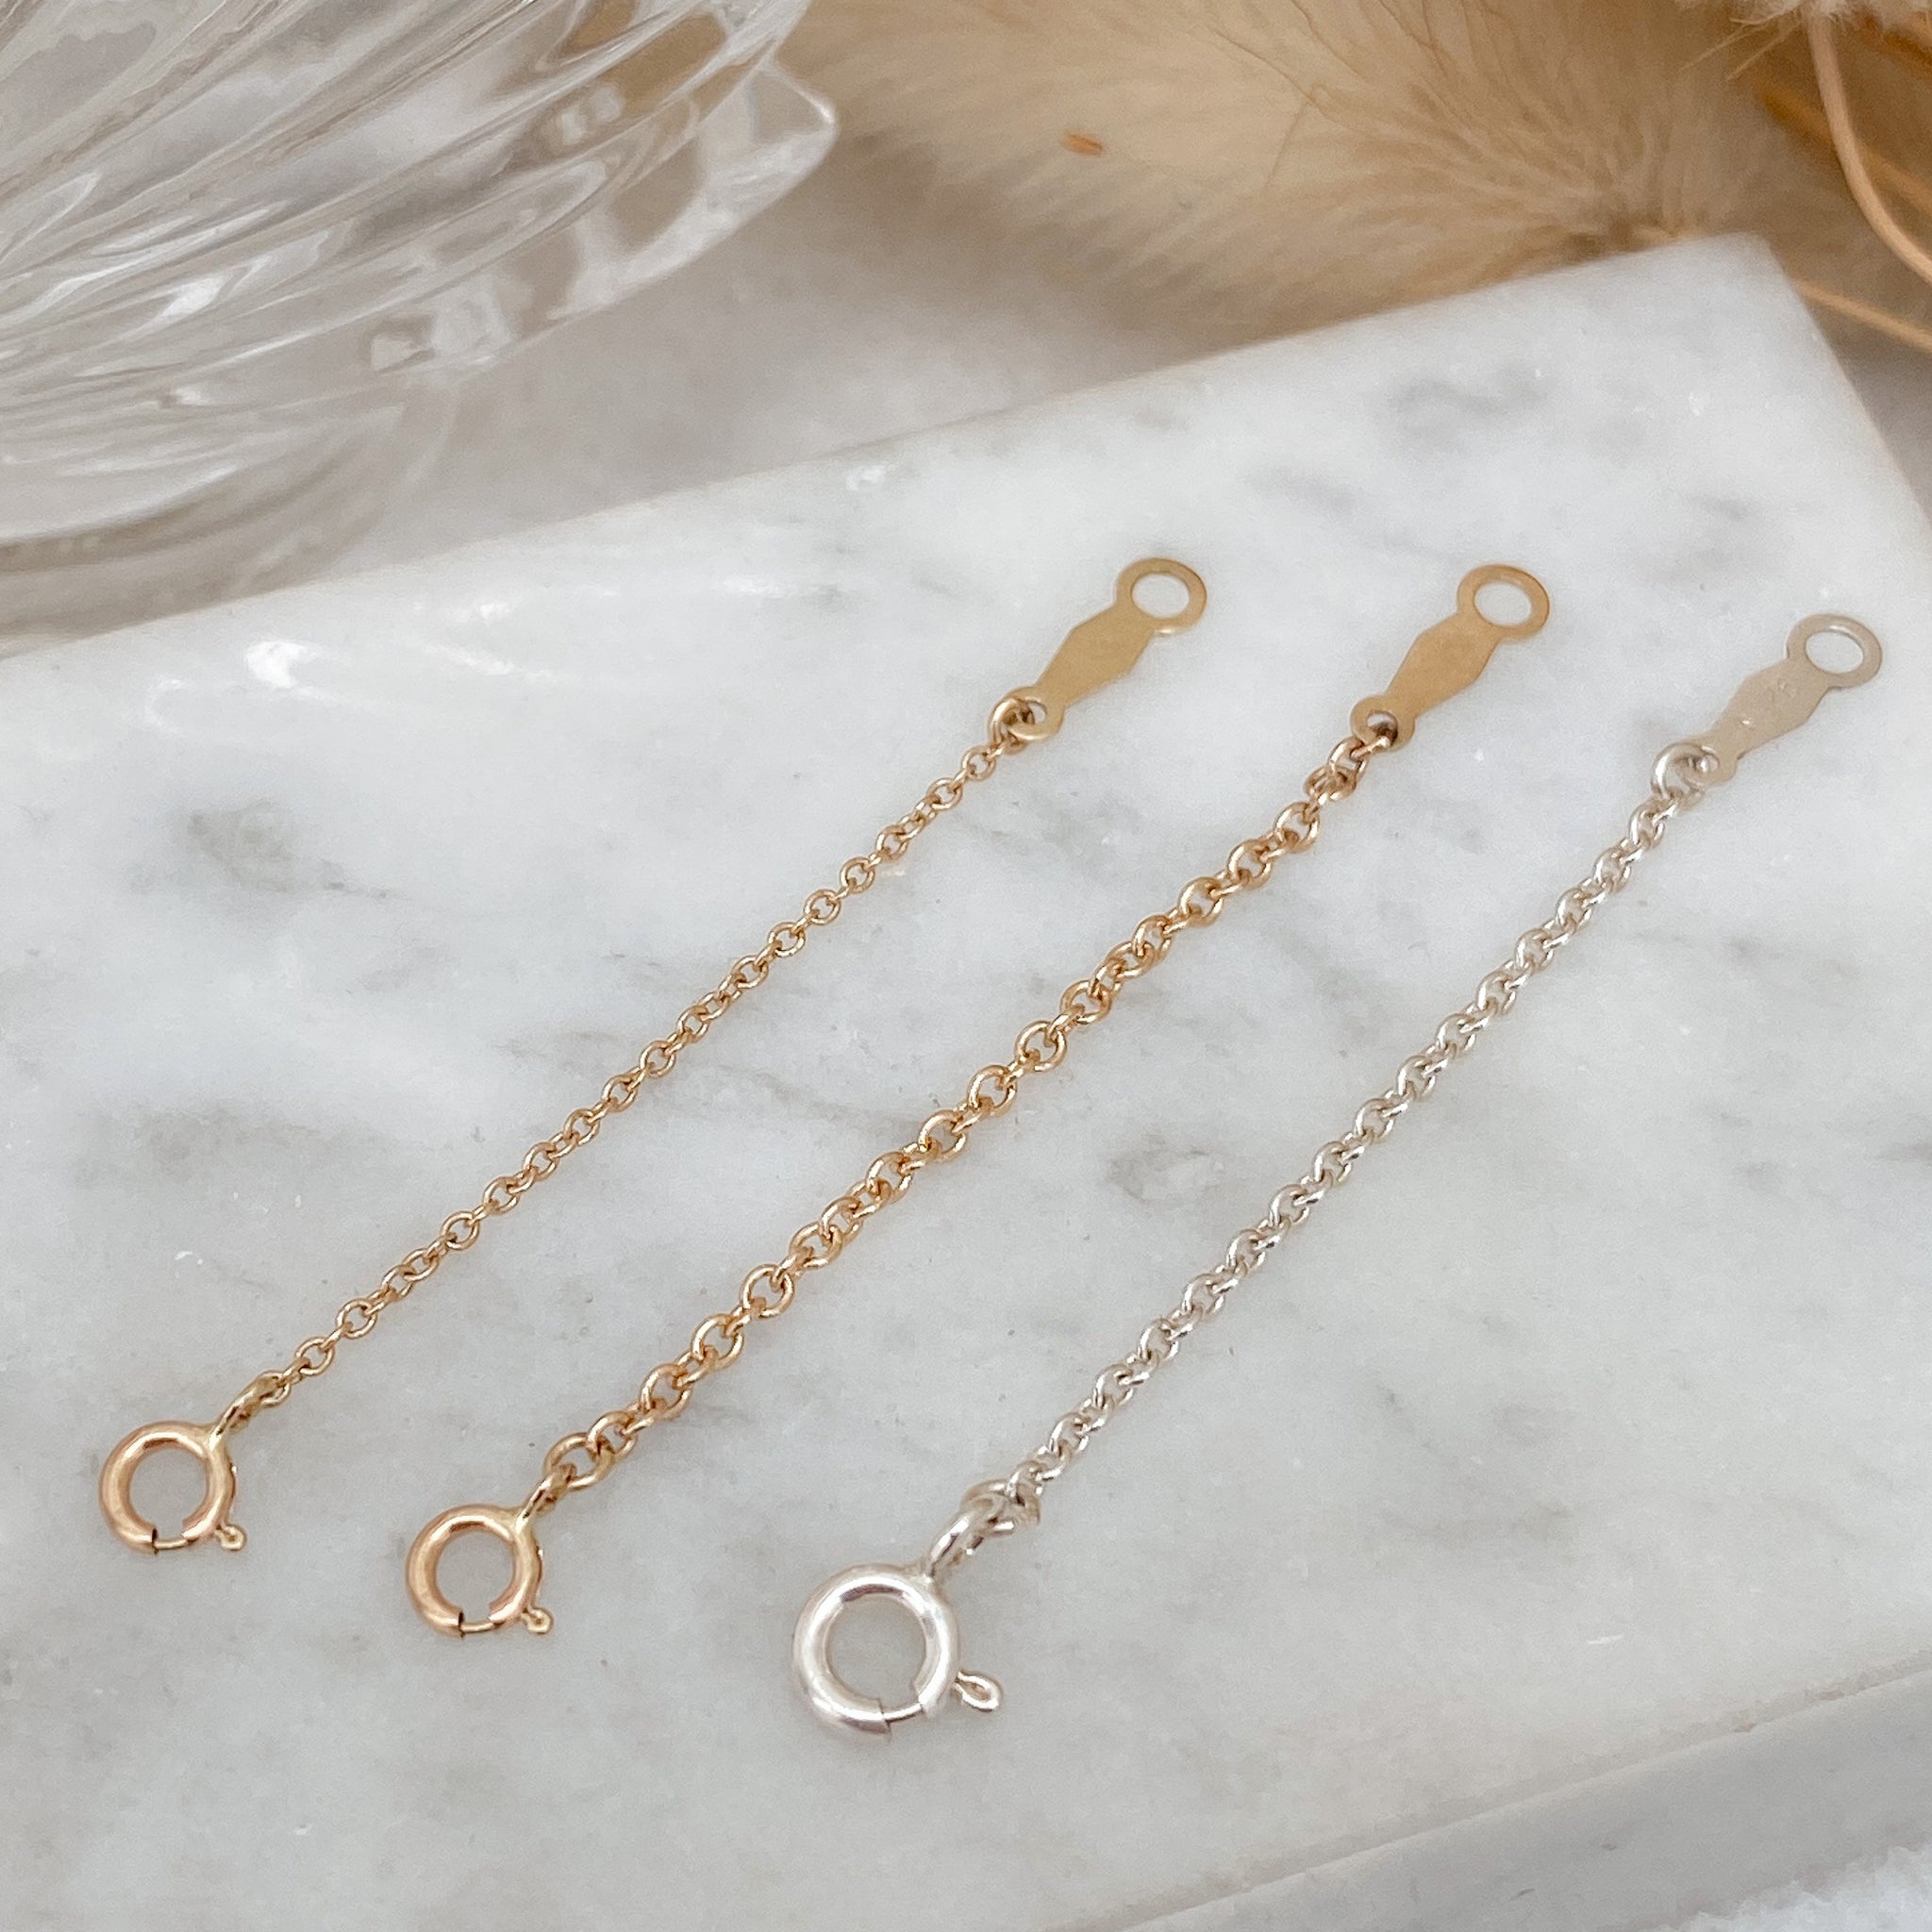 Necklace Chain Extender in Gold and Silver | Uncommon James